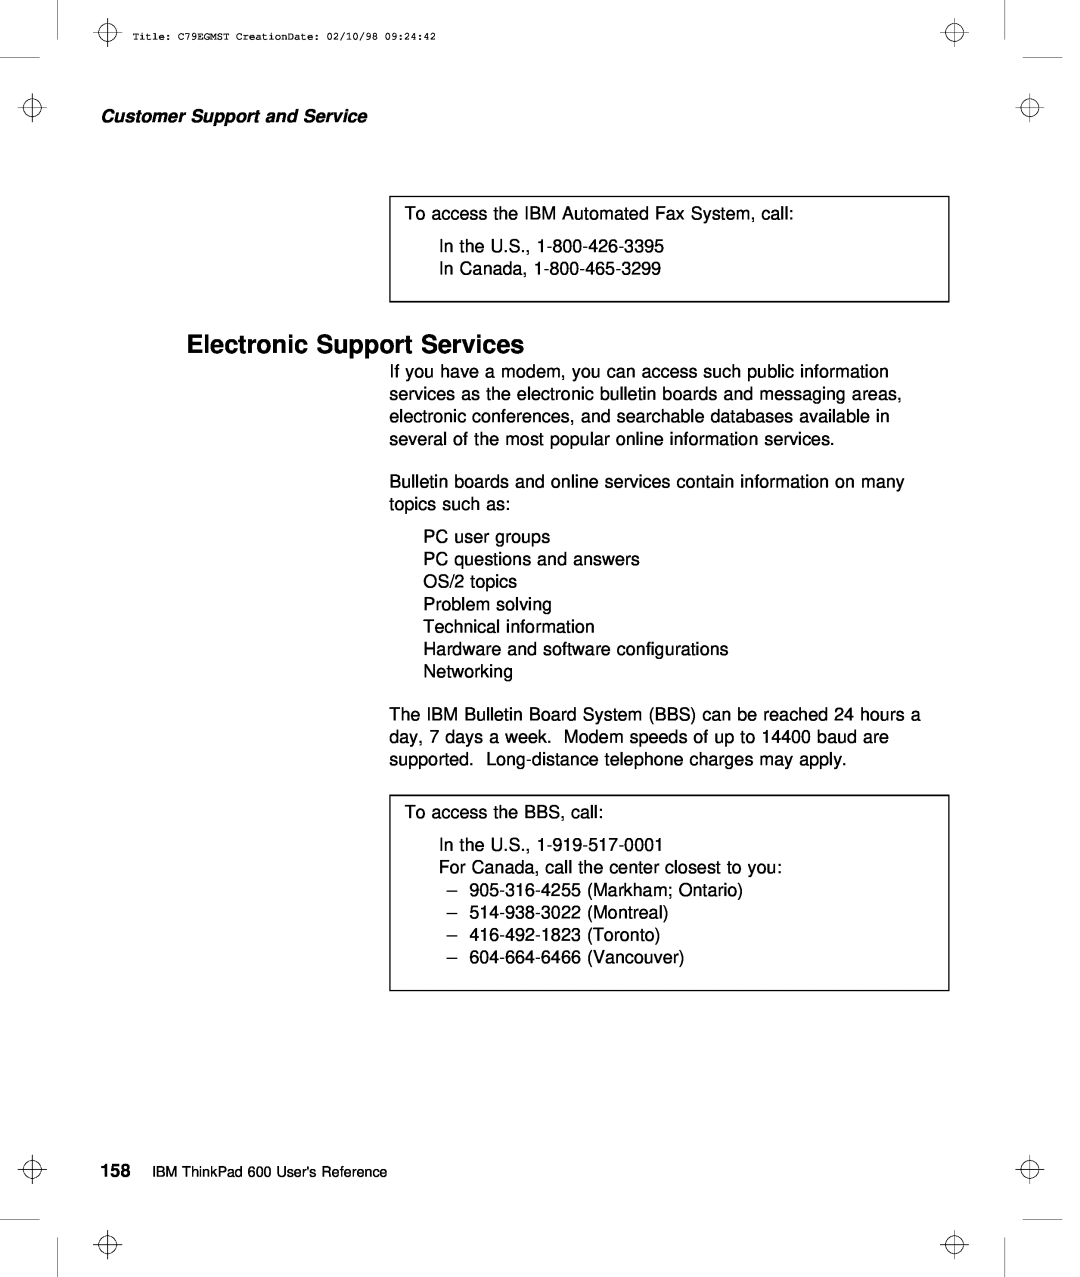 IBM C79EGMST manual Electronic Support Services, Customer Support and Service, IBM ThinkPad 600 Users Reference 